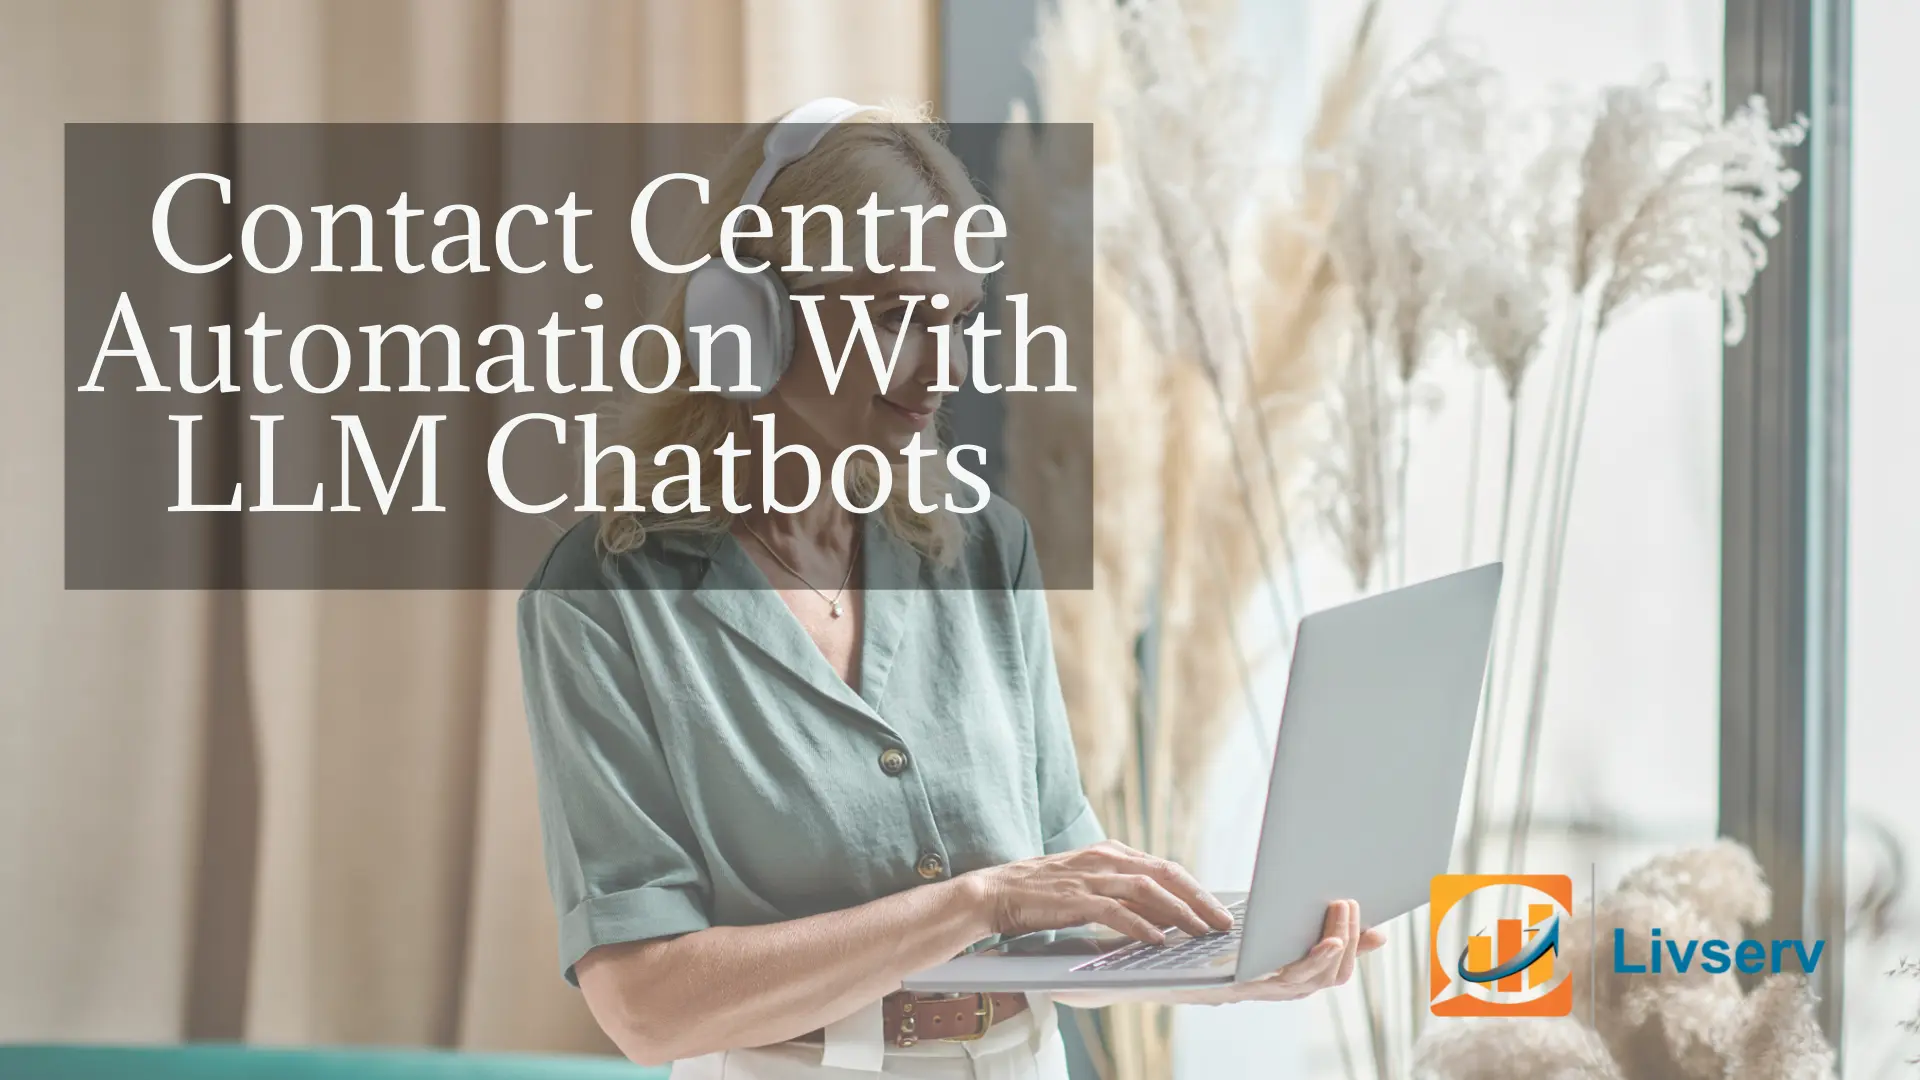 Contact Center Automation: 5 Calls You Should Automate Using LLM Chatbots